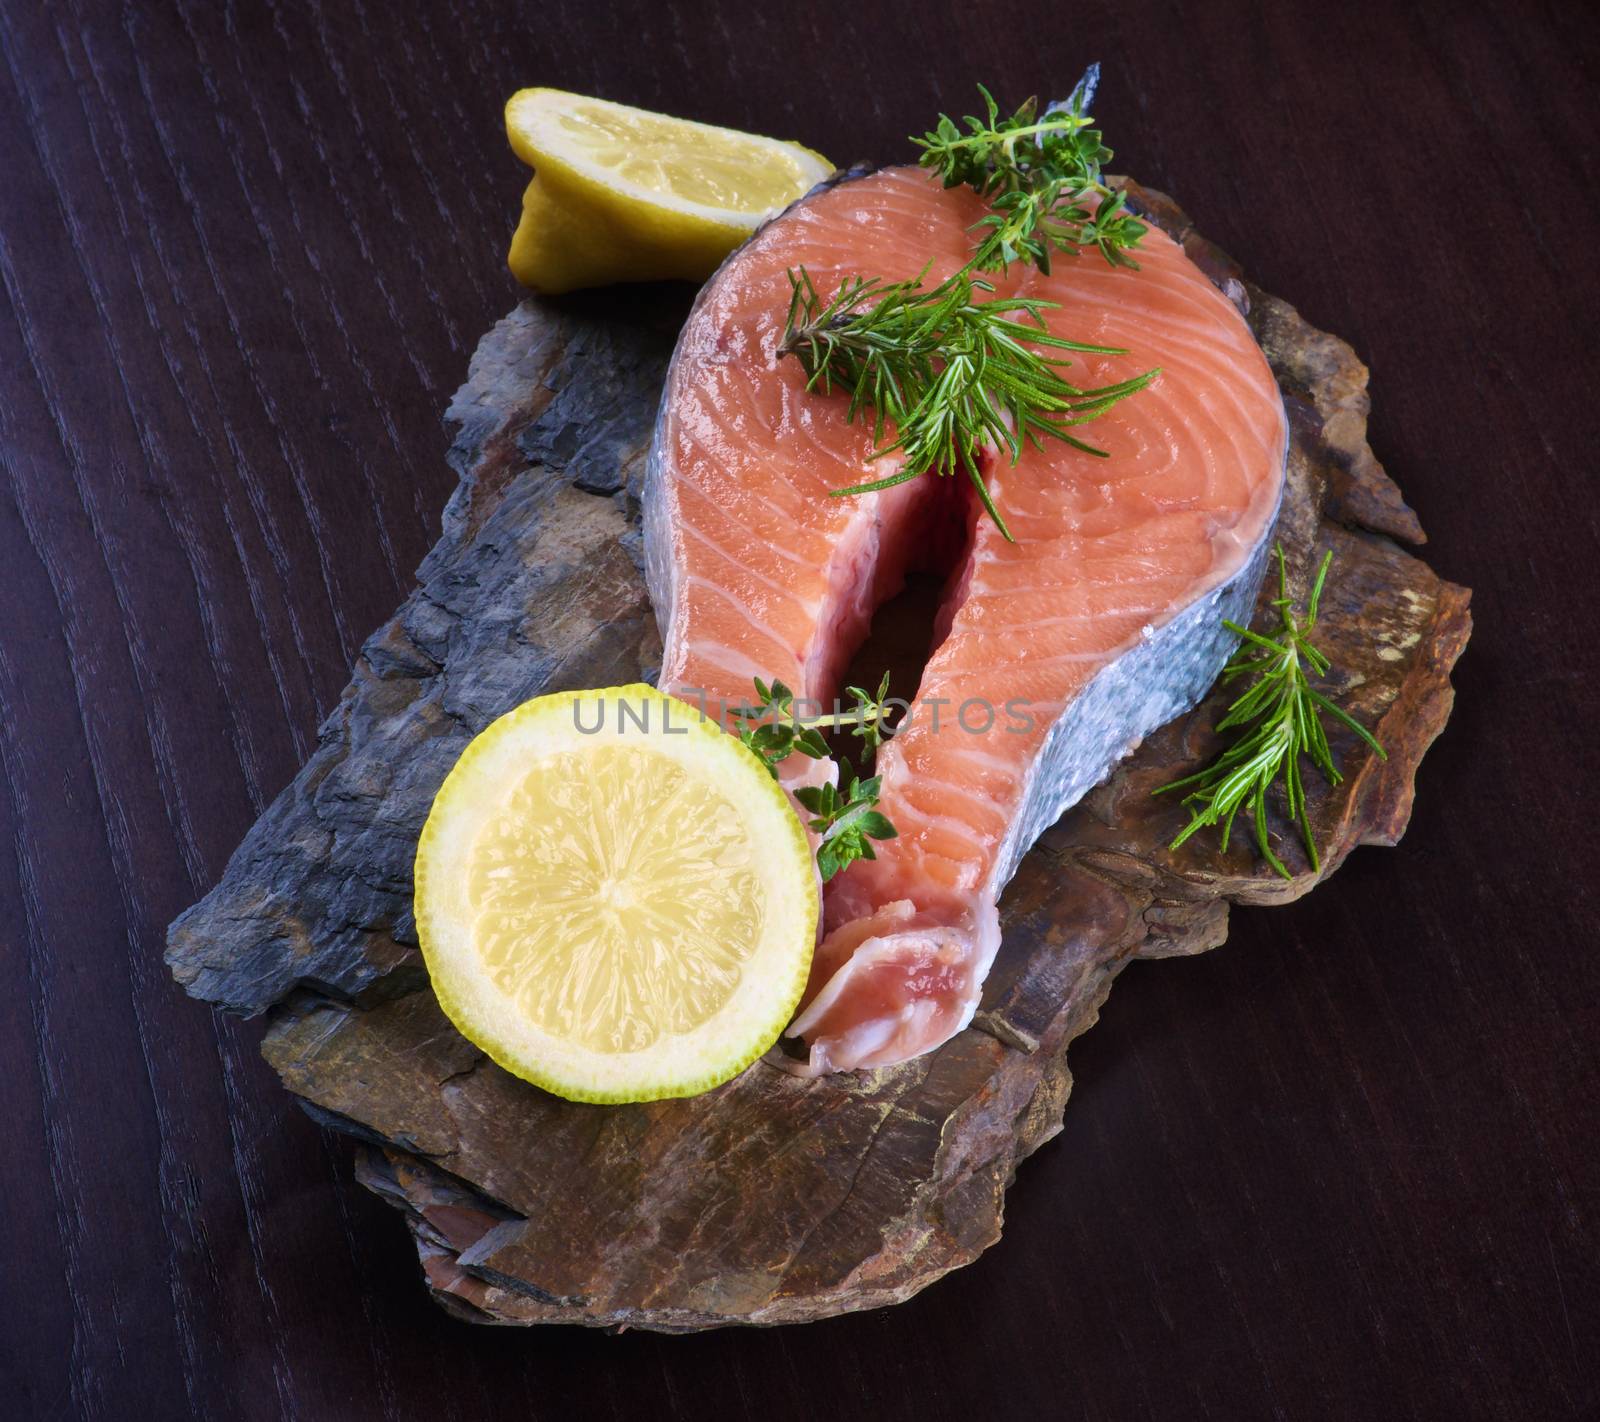 Perfect Raw Salmon Steak with Slices of Lemon and Rosemary on Shale Stone Board closeup on Dark Wooden background